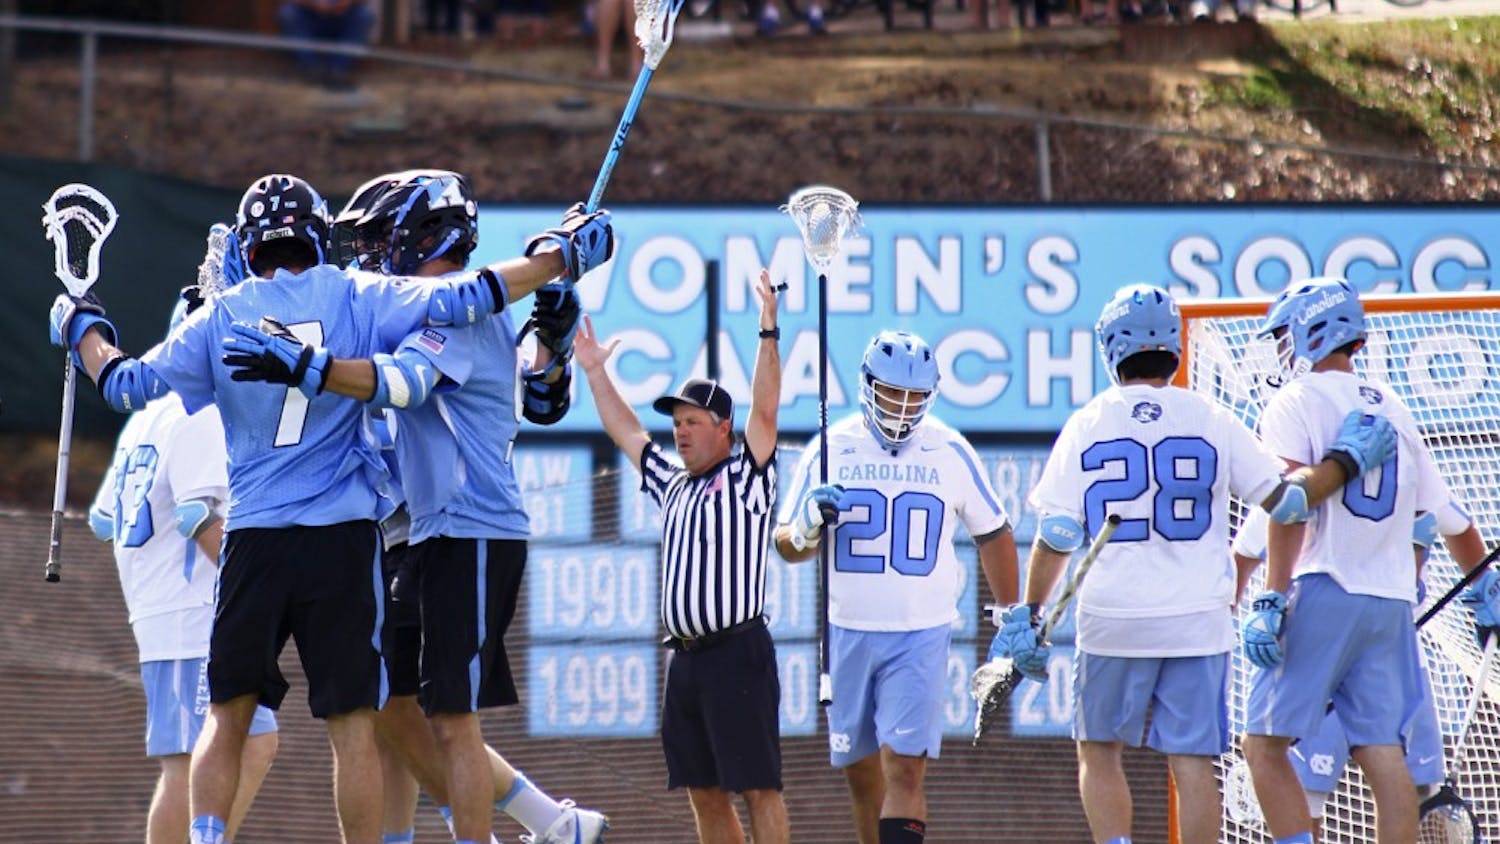 Johns Hopkins' players celebrate a goal during their 13-5 victory over UNC on Saturday, February 25, 2017.